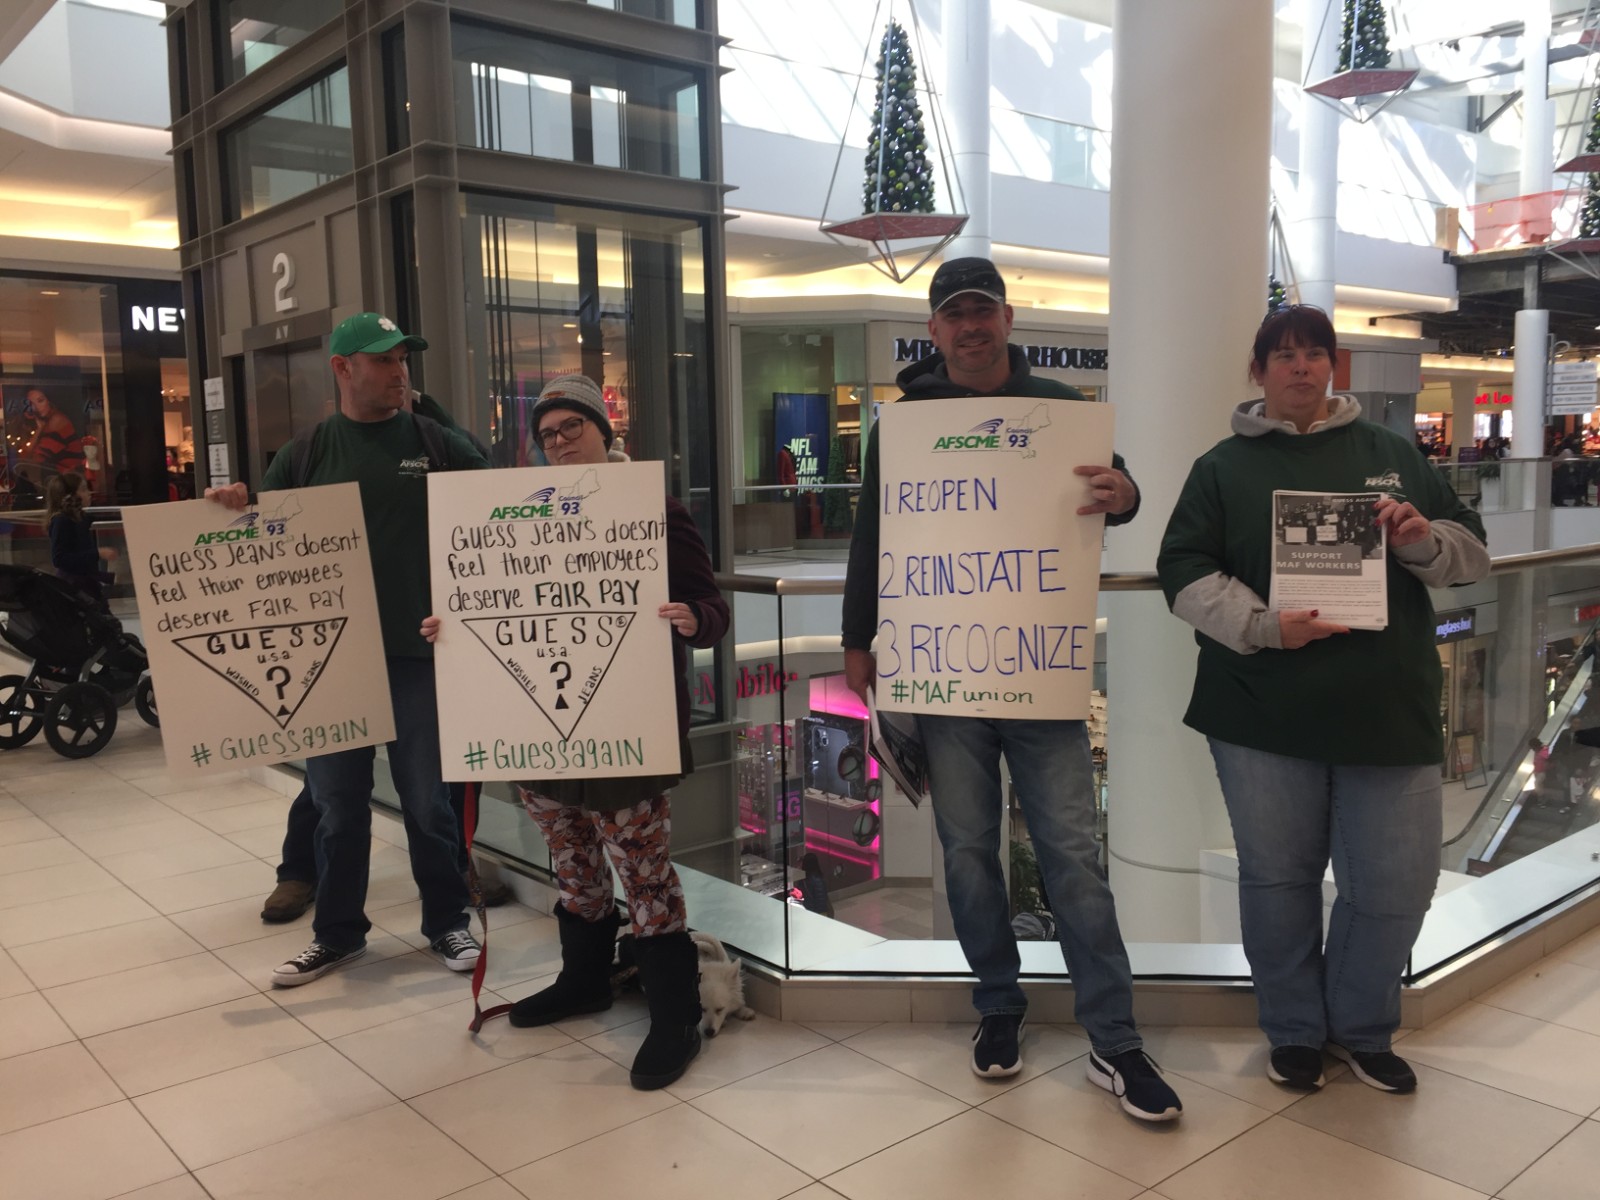 Peaceful protesters outside GUESS in the CambrdigeSide Galleria, Cambridge, Massachusetts.